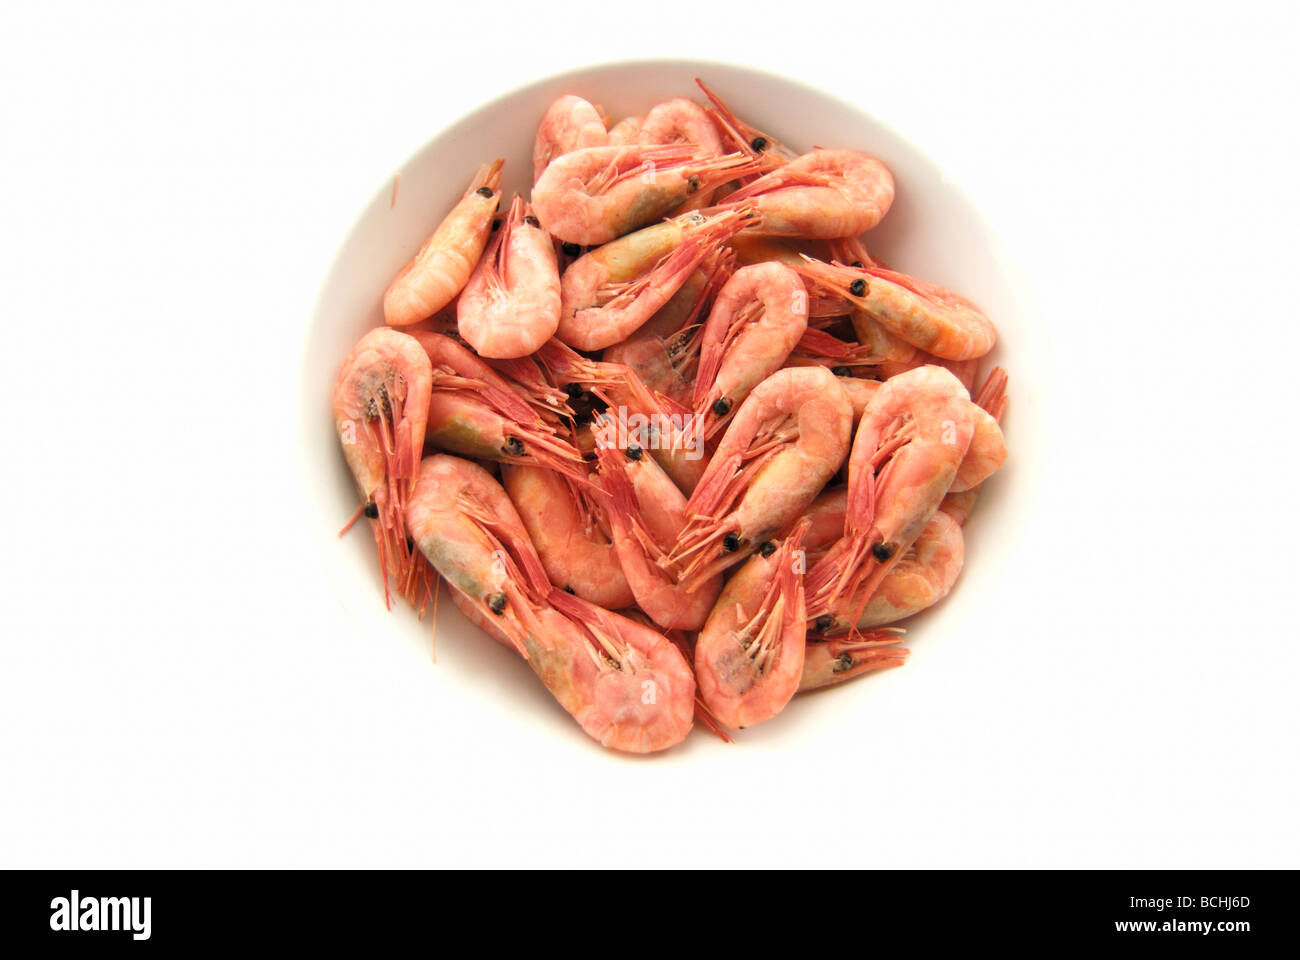 A bowl of cooked prawns Stock Photo